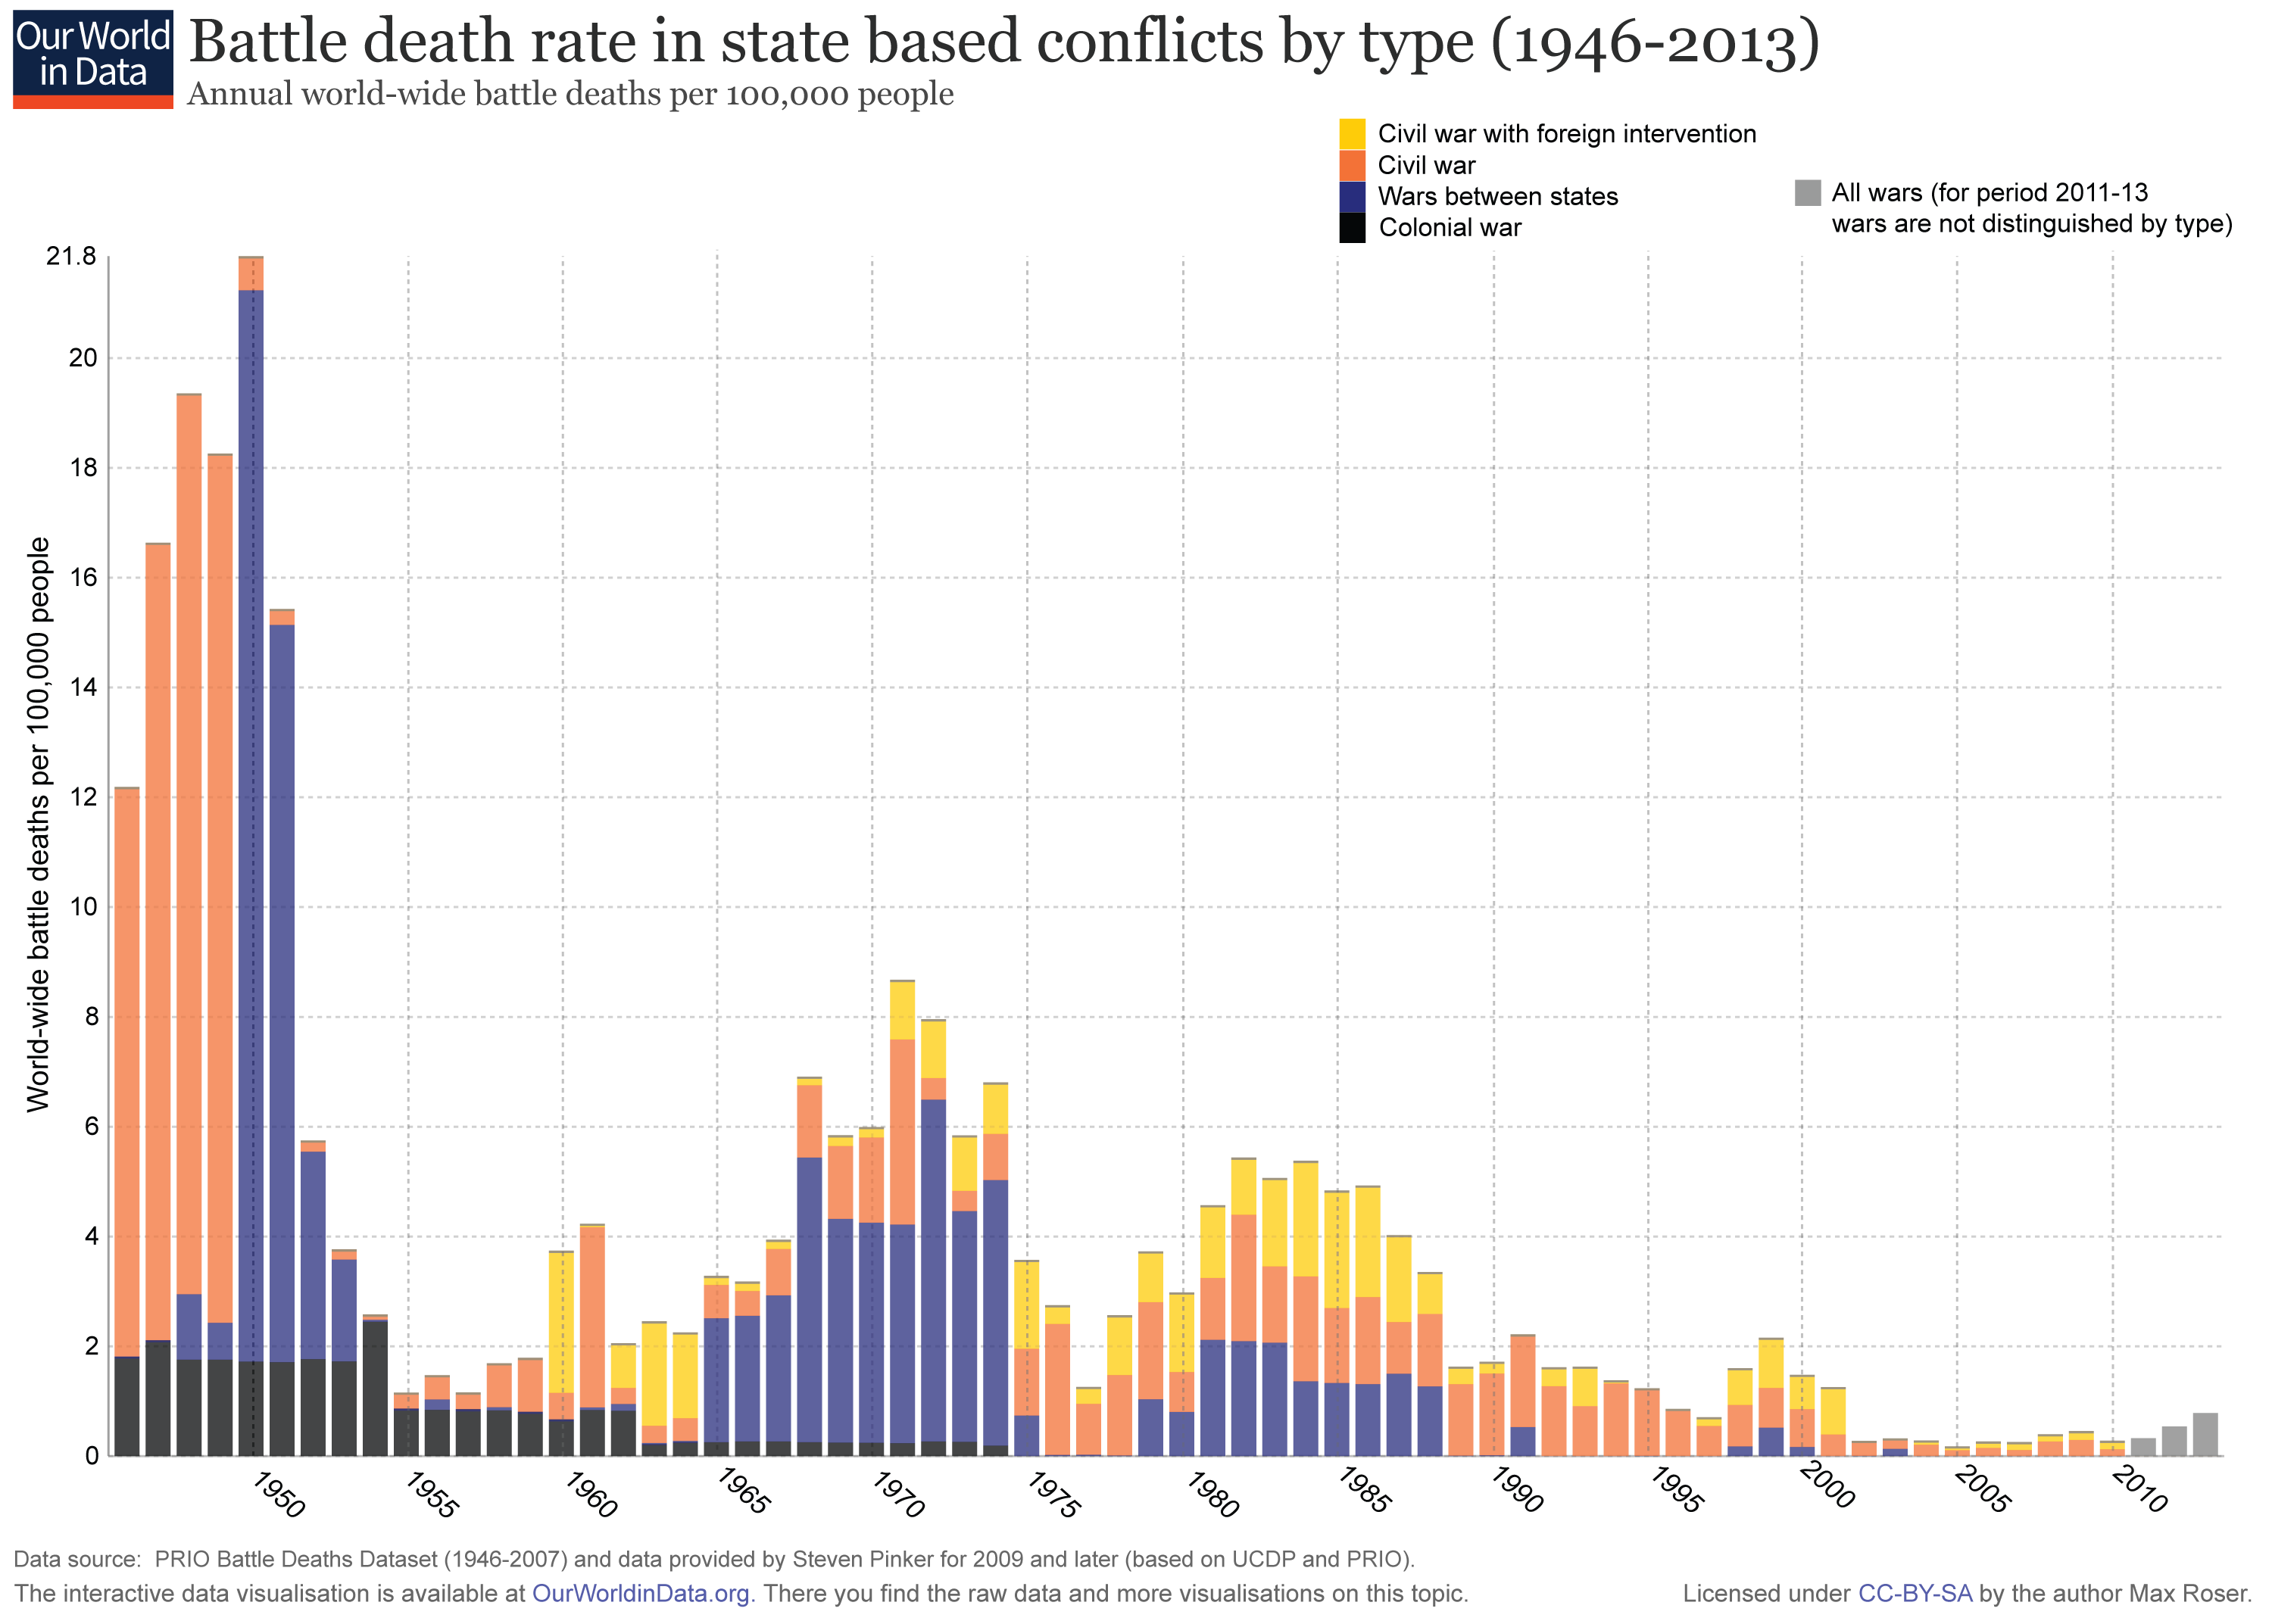 Wars-after-1946-State-Based-Battle-Death-Rate-By-Type.png